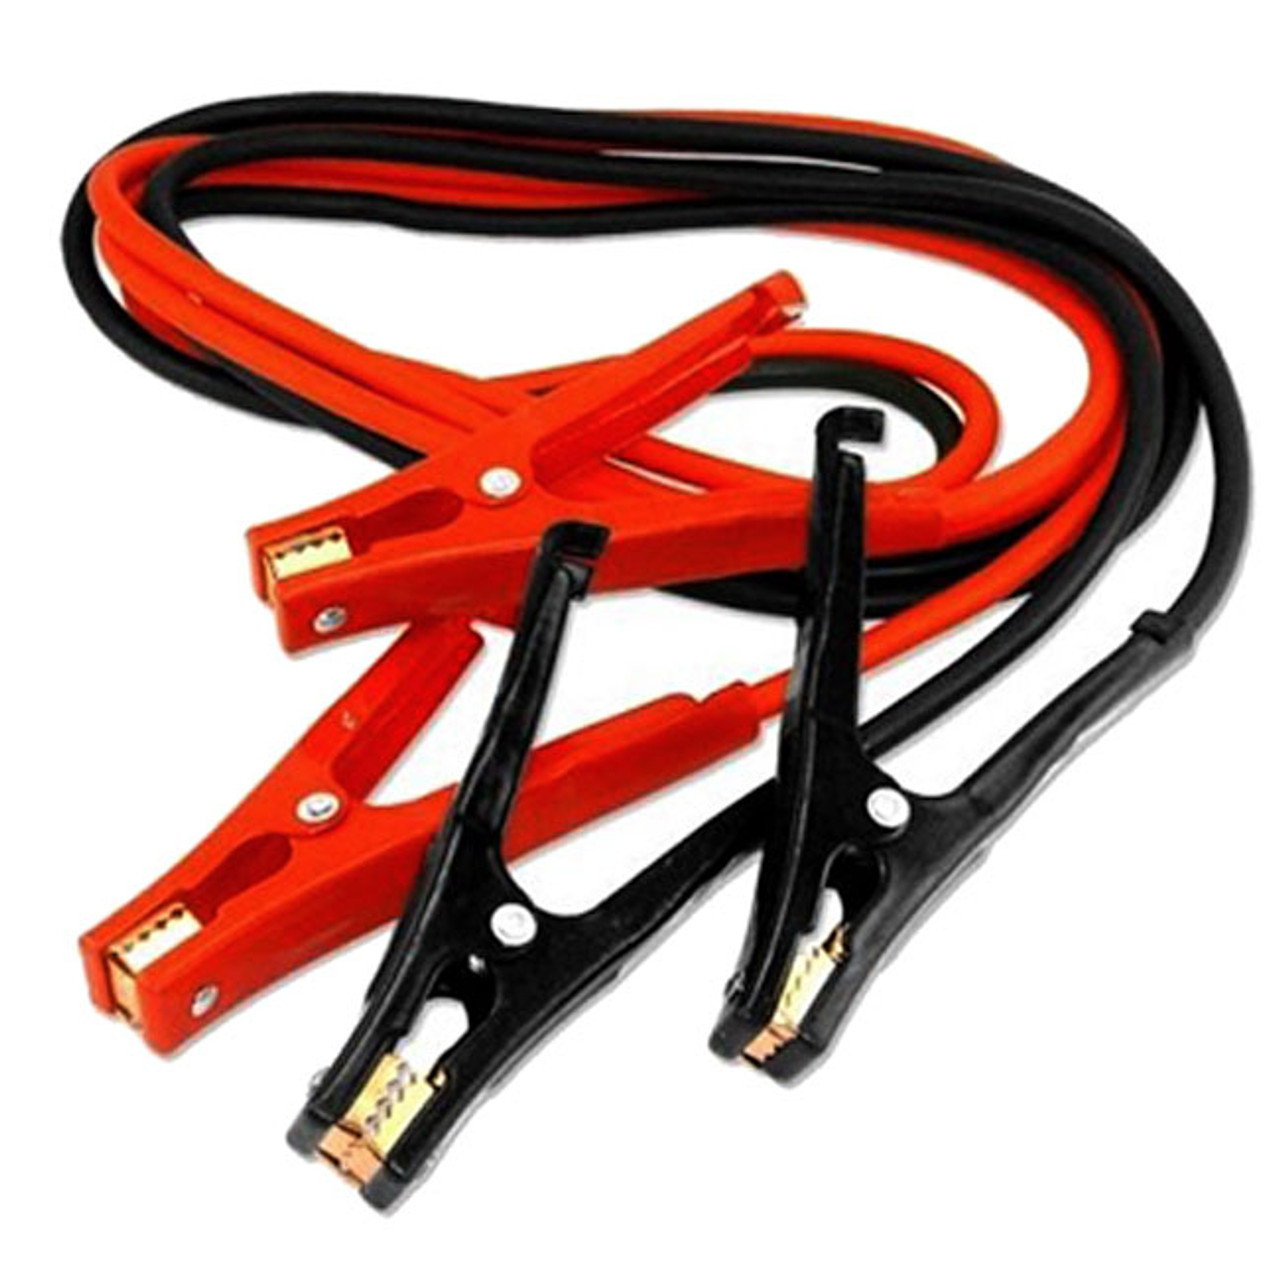 Heavy Duty 6 Gauge Jumper Cables - 12 ft. - Auto Emergency Tools